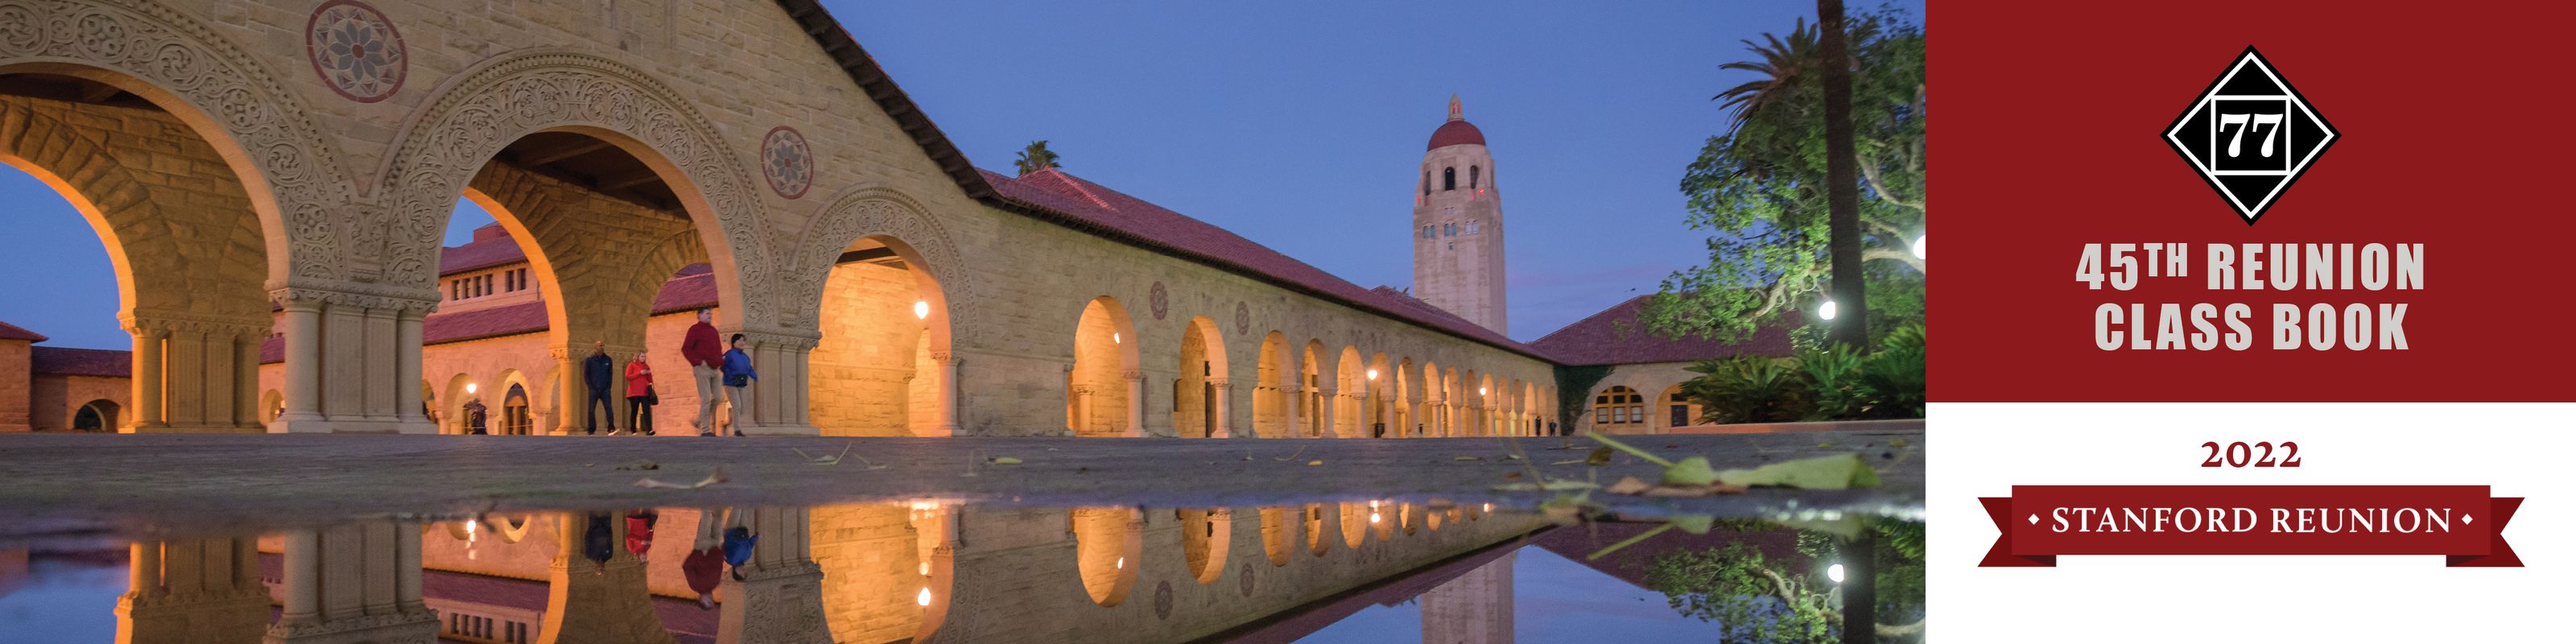 Stanford Class of 1977 – 45th Reunion